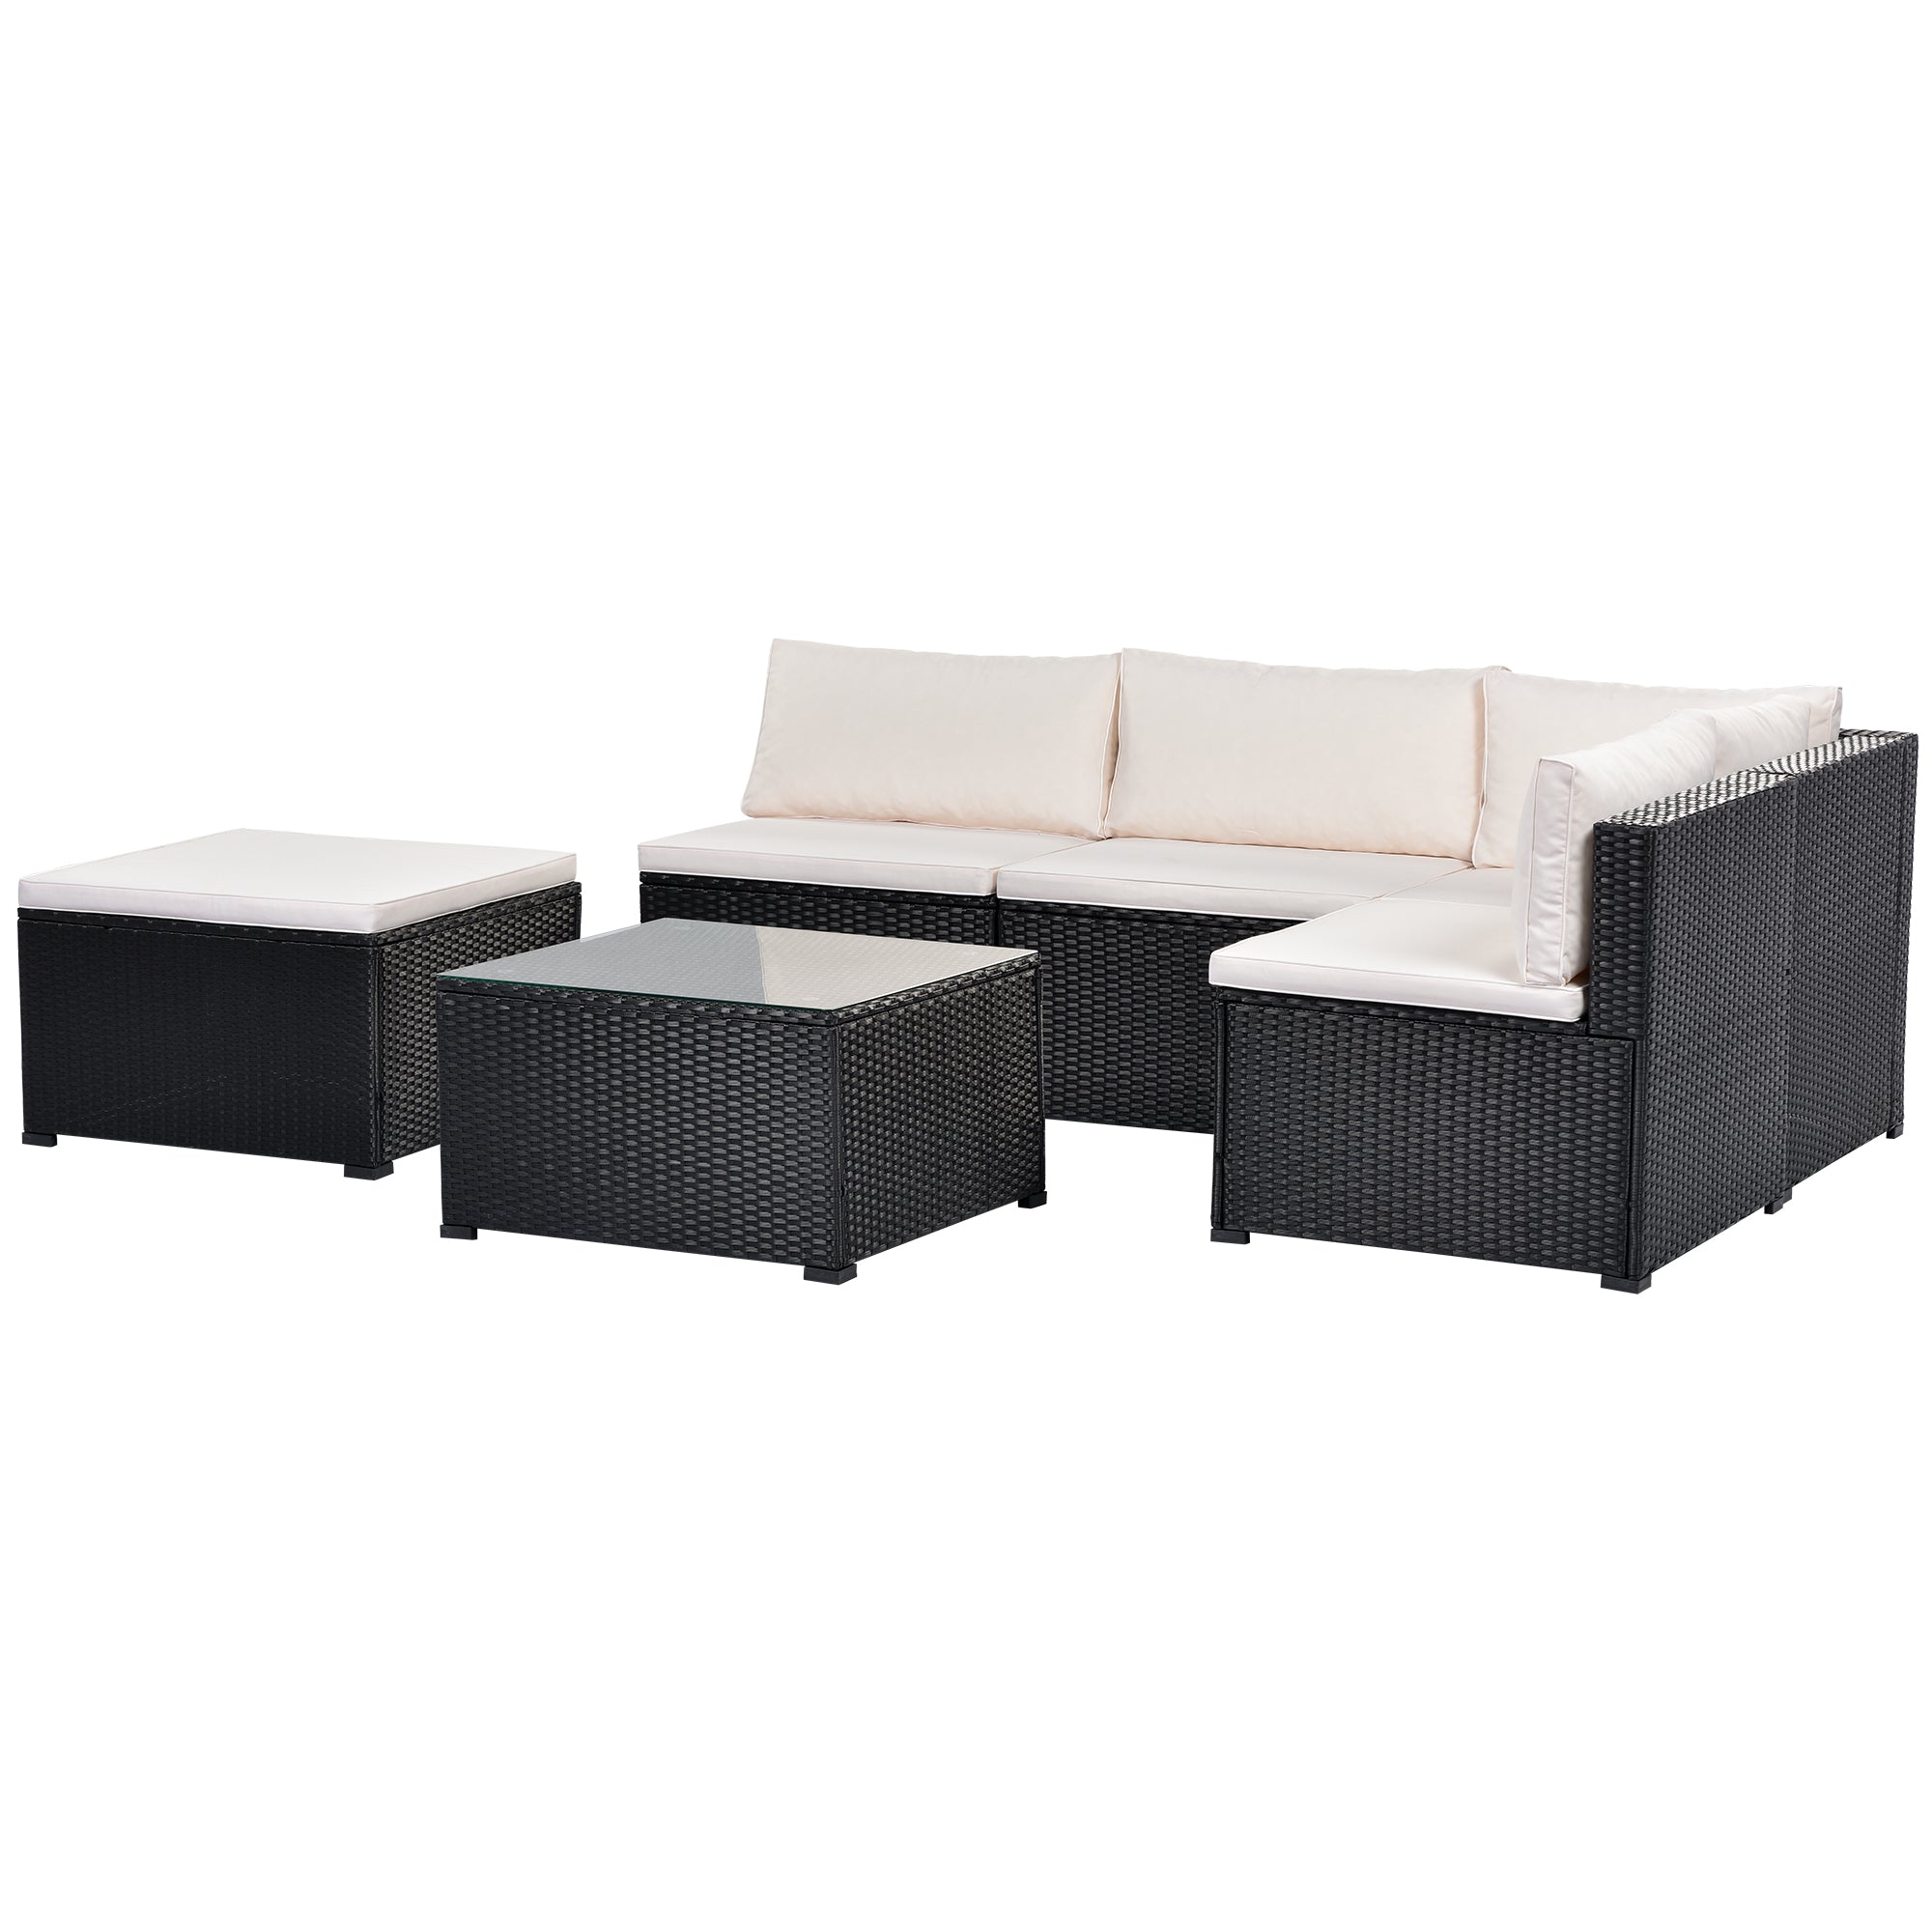 6-Piece Outdoor Furniture Set with PE Rattan Wicker, Patio Garden Sectional Sofa Chair, removable cushions (Black wicker, Beige cushion)-Boyel Living